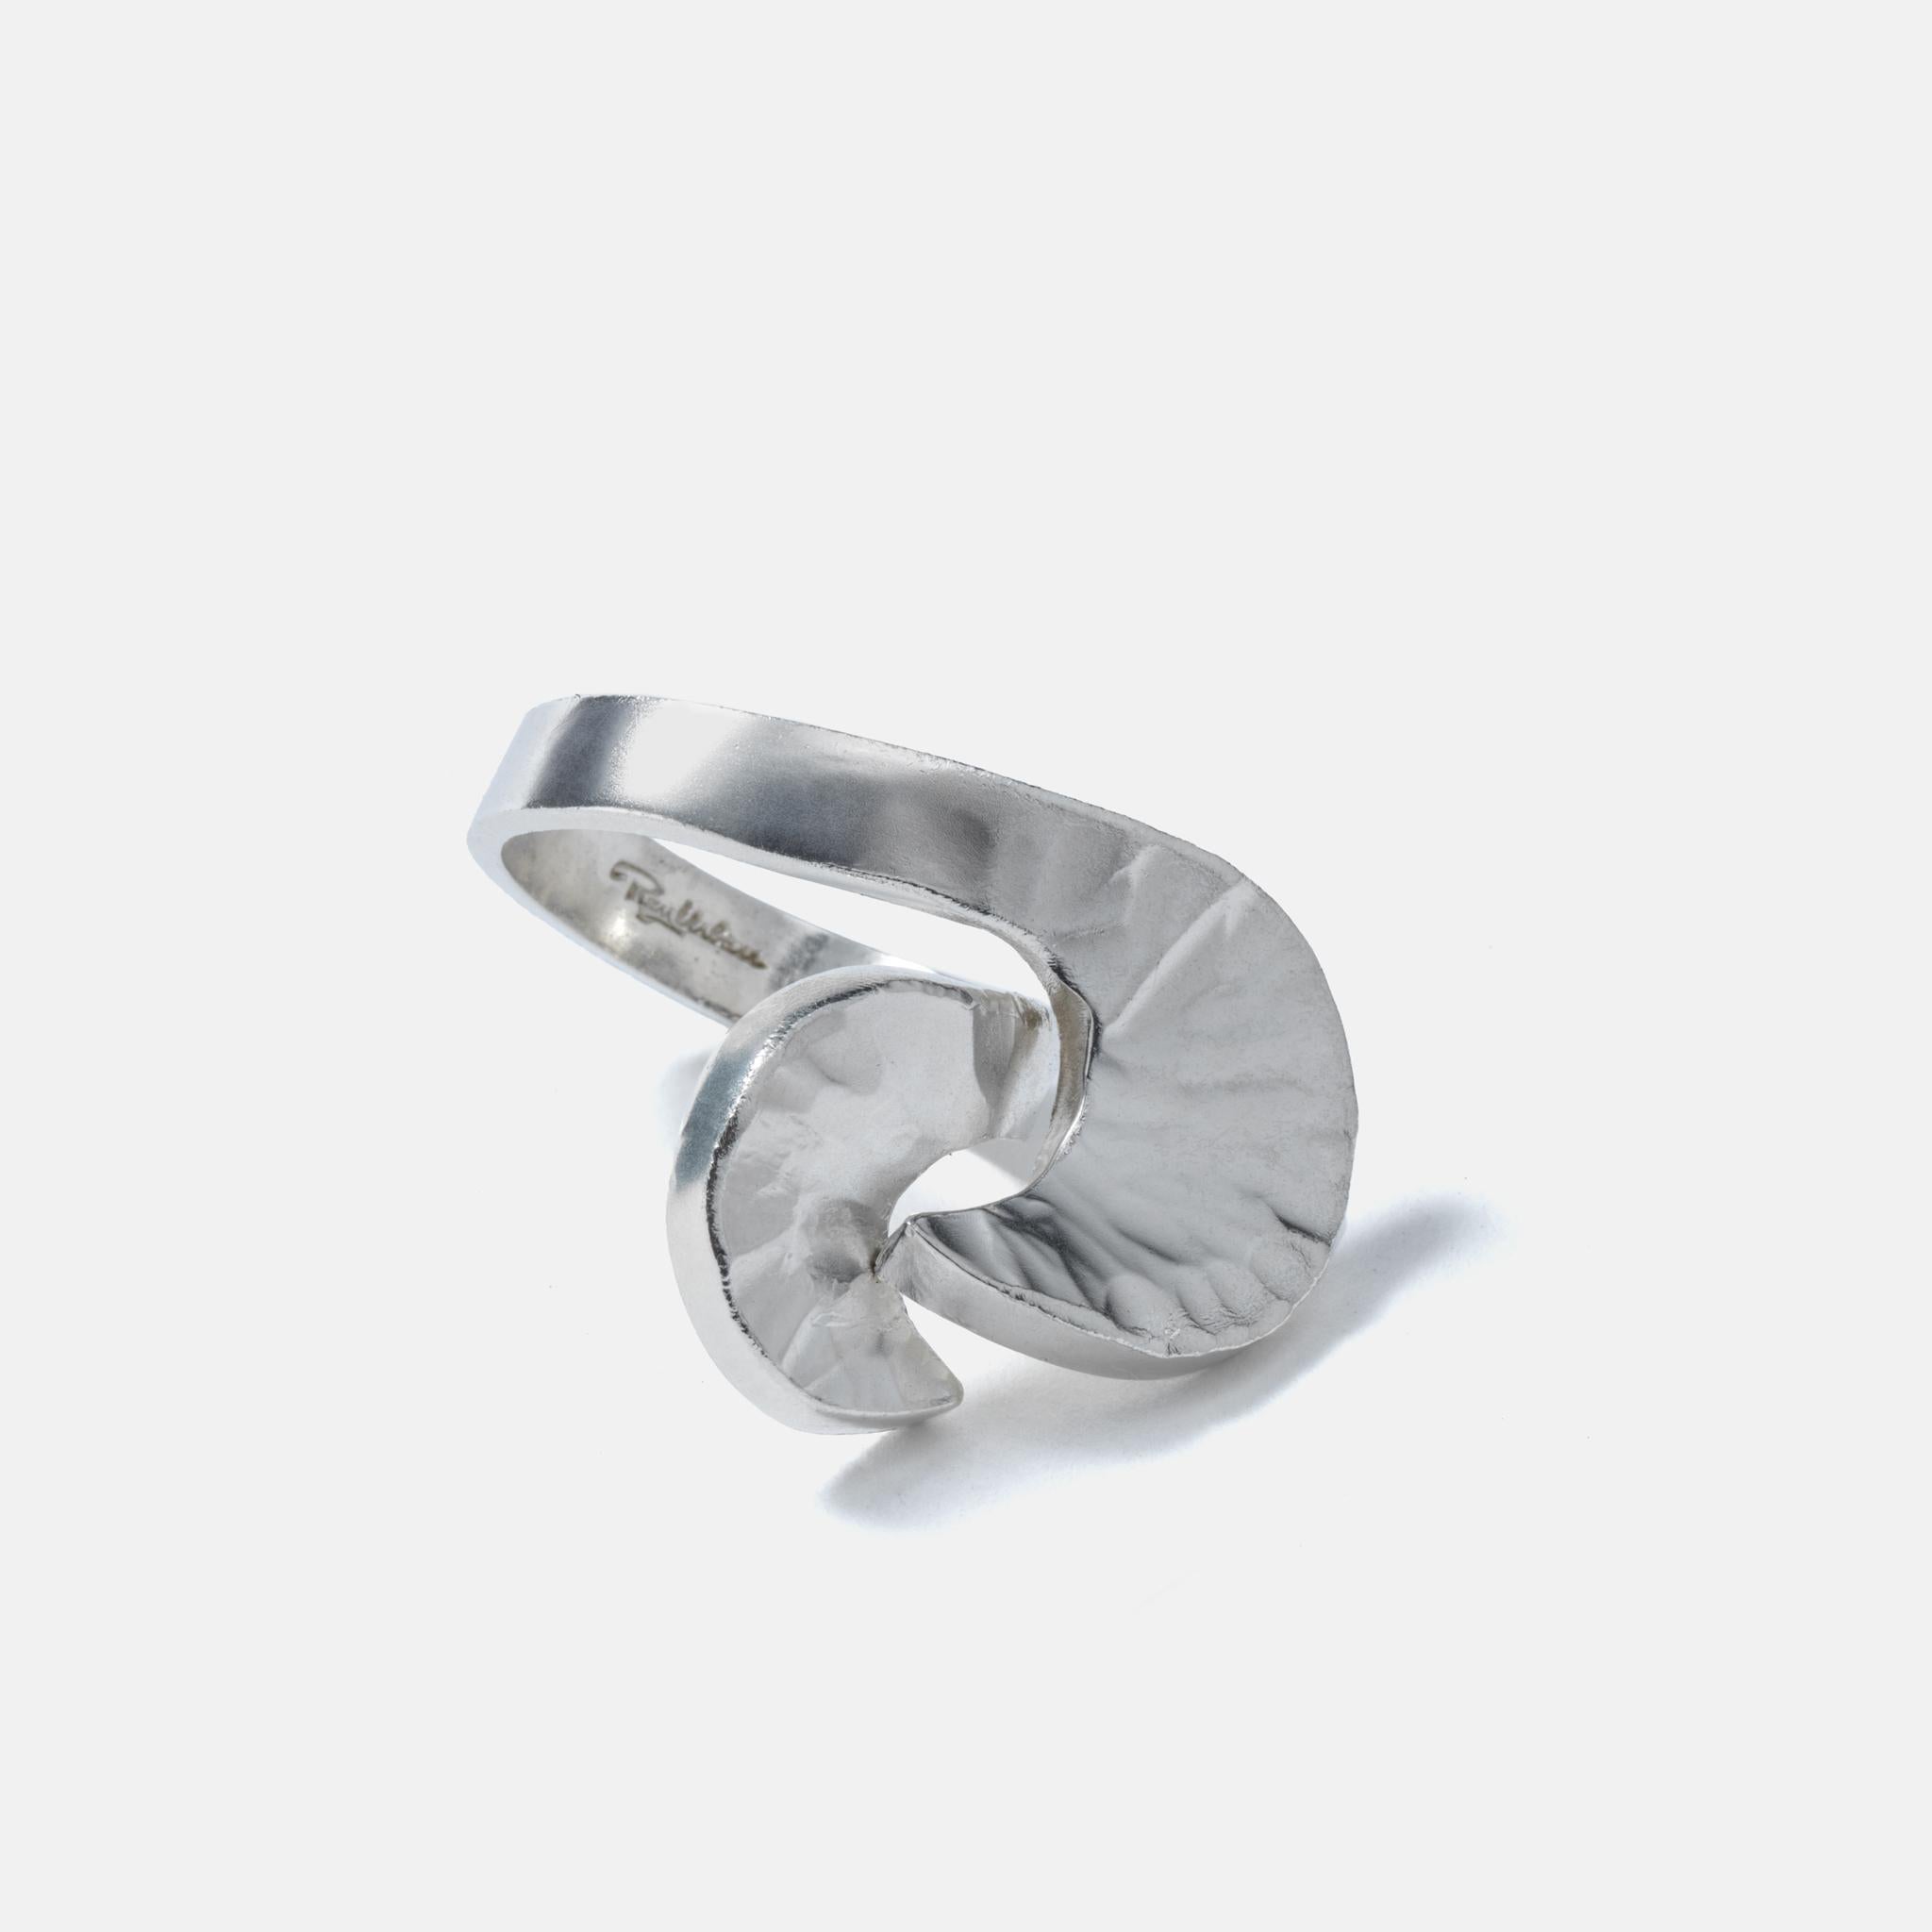 This is a typical 1970s design from one of Swedens at the time best silversmiths, Rey Urban. He is playing with the shapes and creates two half-moons that meet each other. The silver surface is partly shiny and partly matt.

This is a great ring to